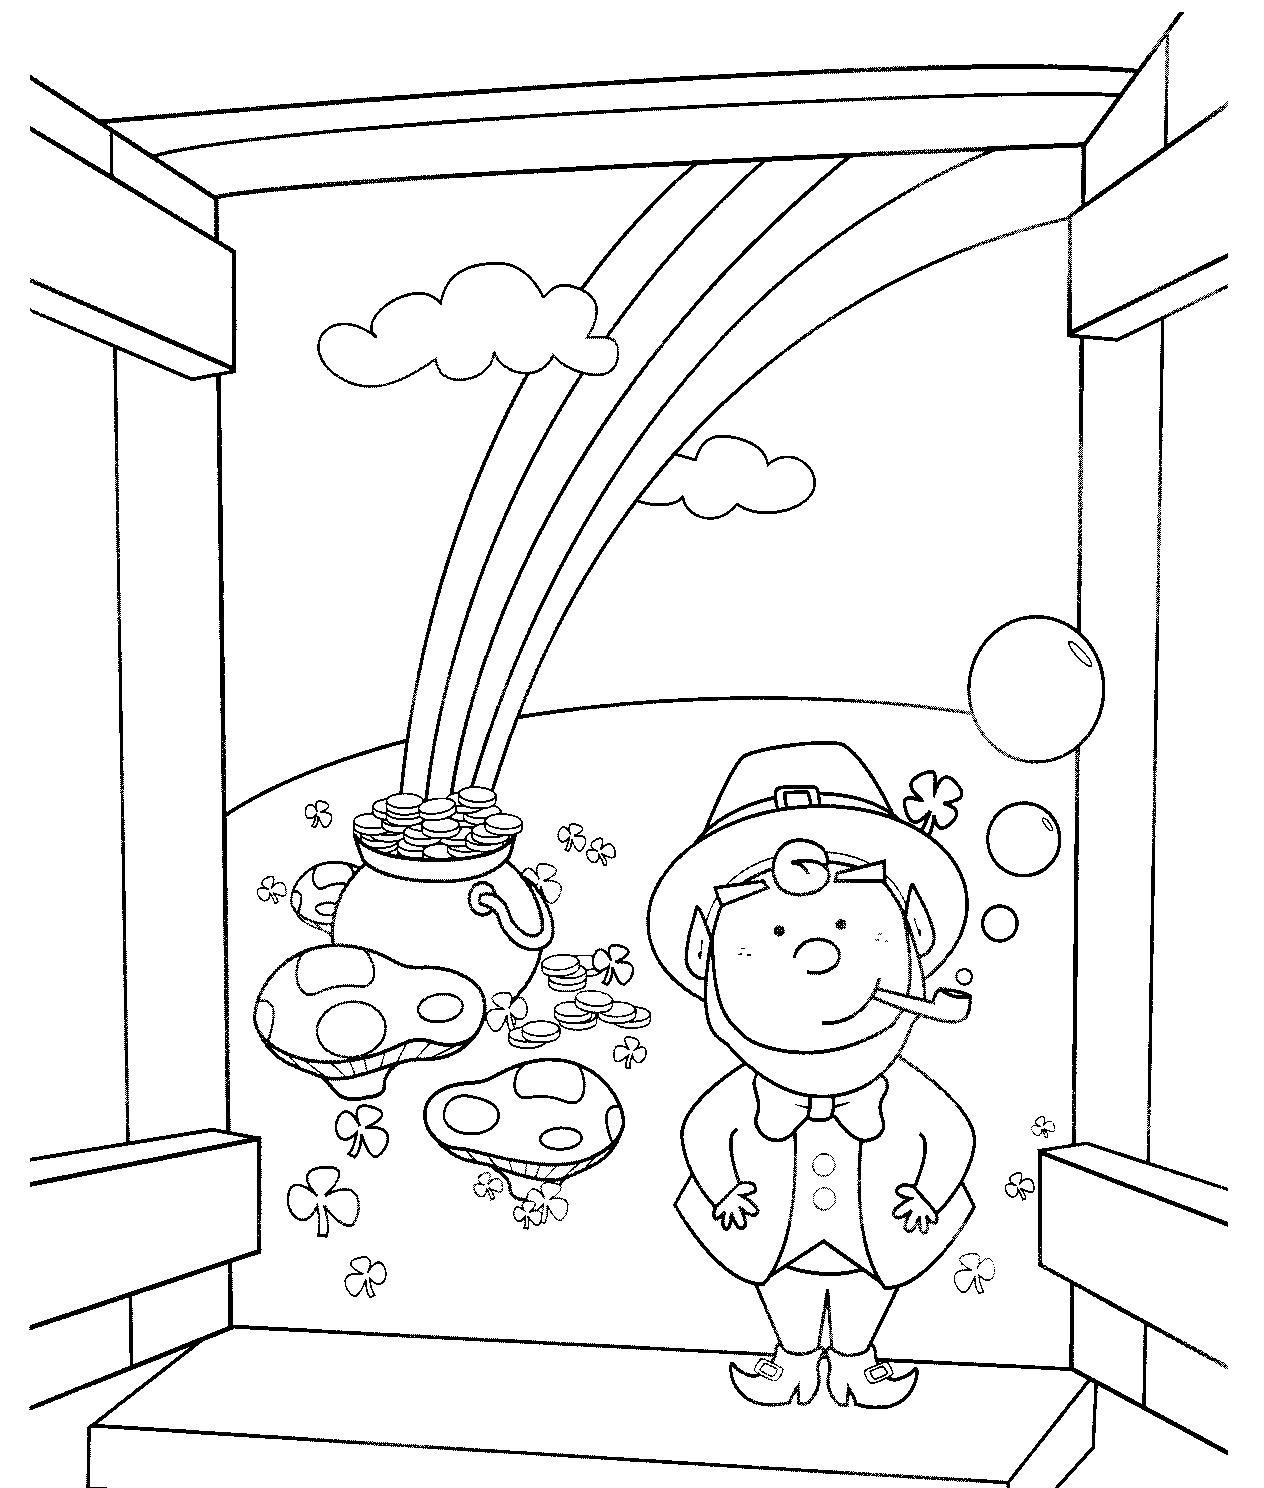 St Patrick'S Day Coloring Pages For Kids
 St Patrick s Day Coloring Pages for childrens printable